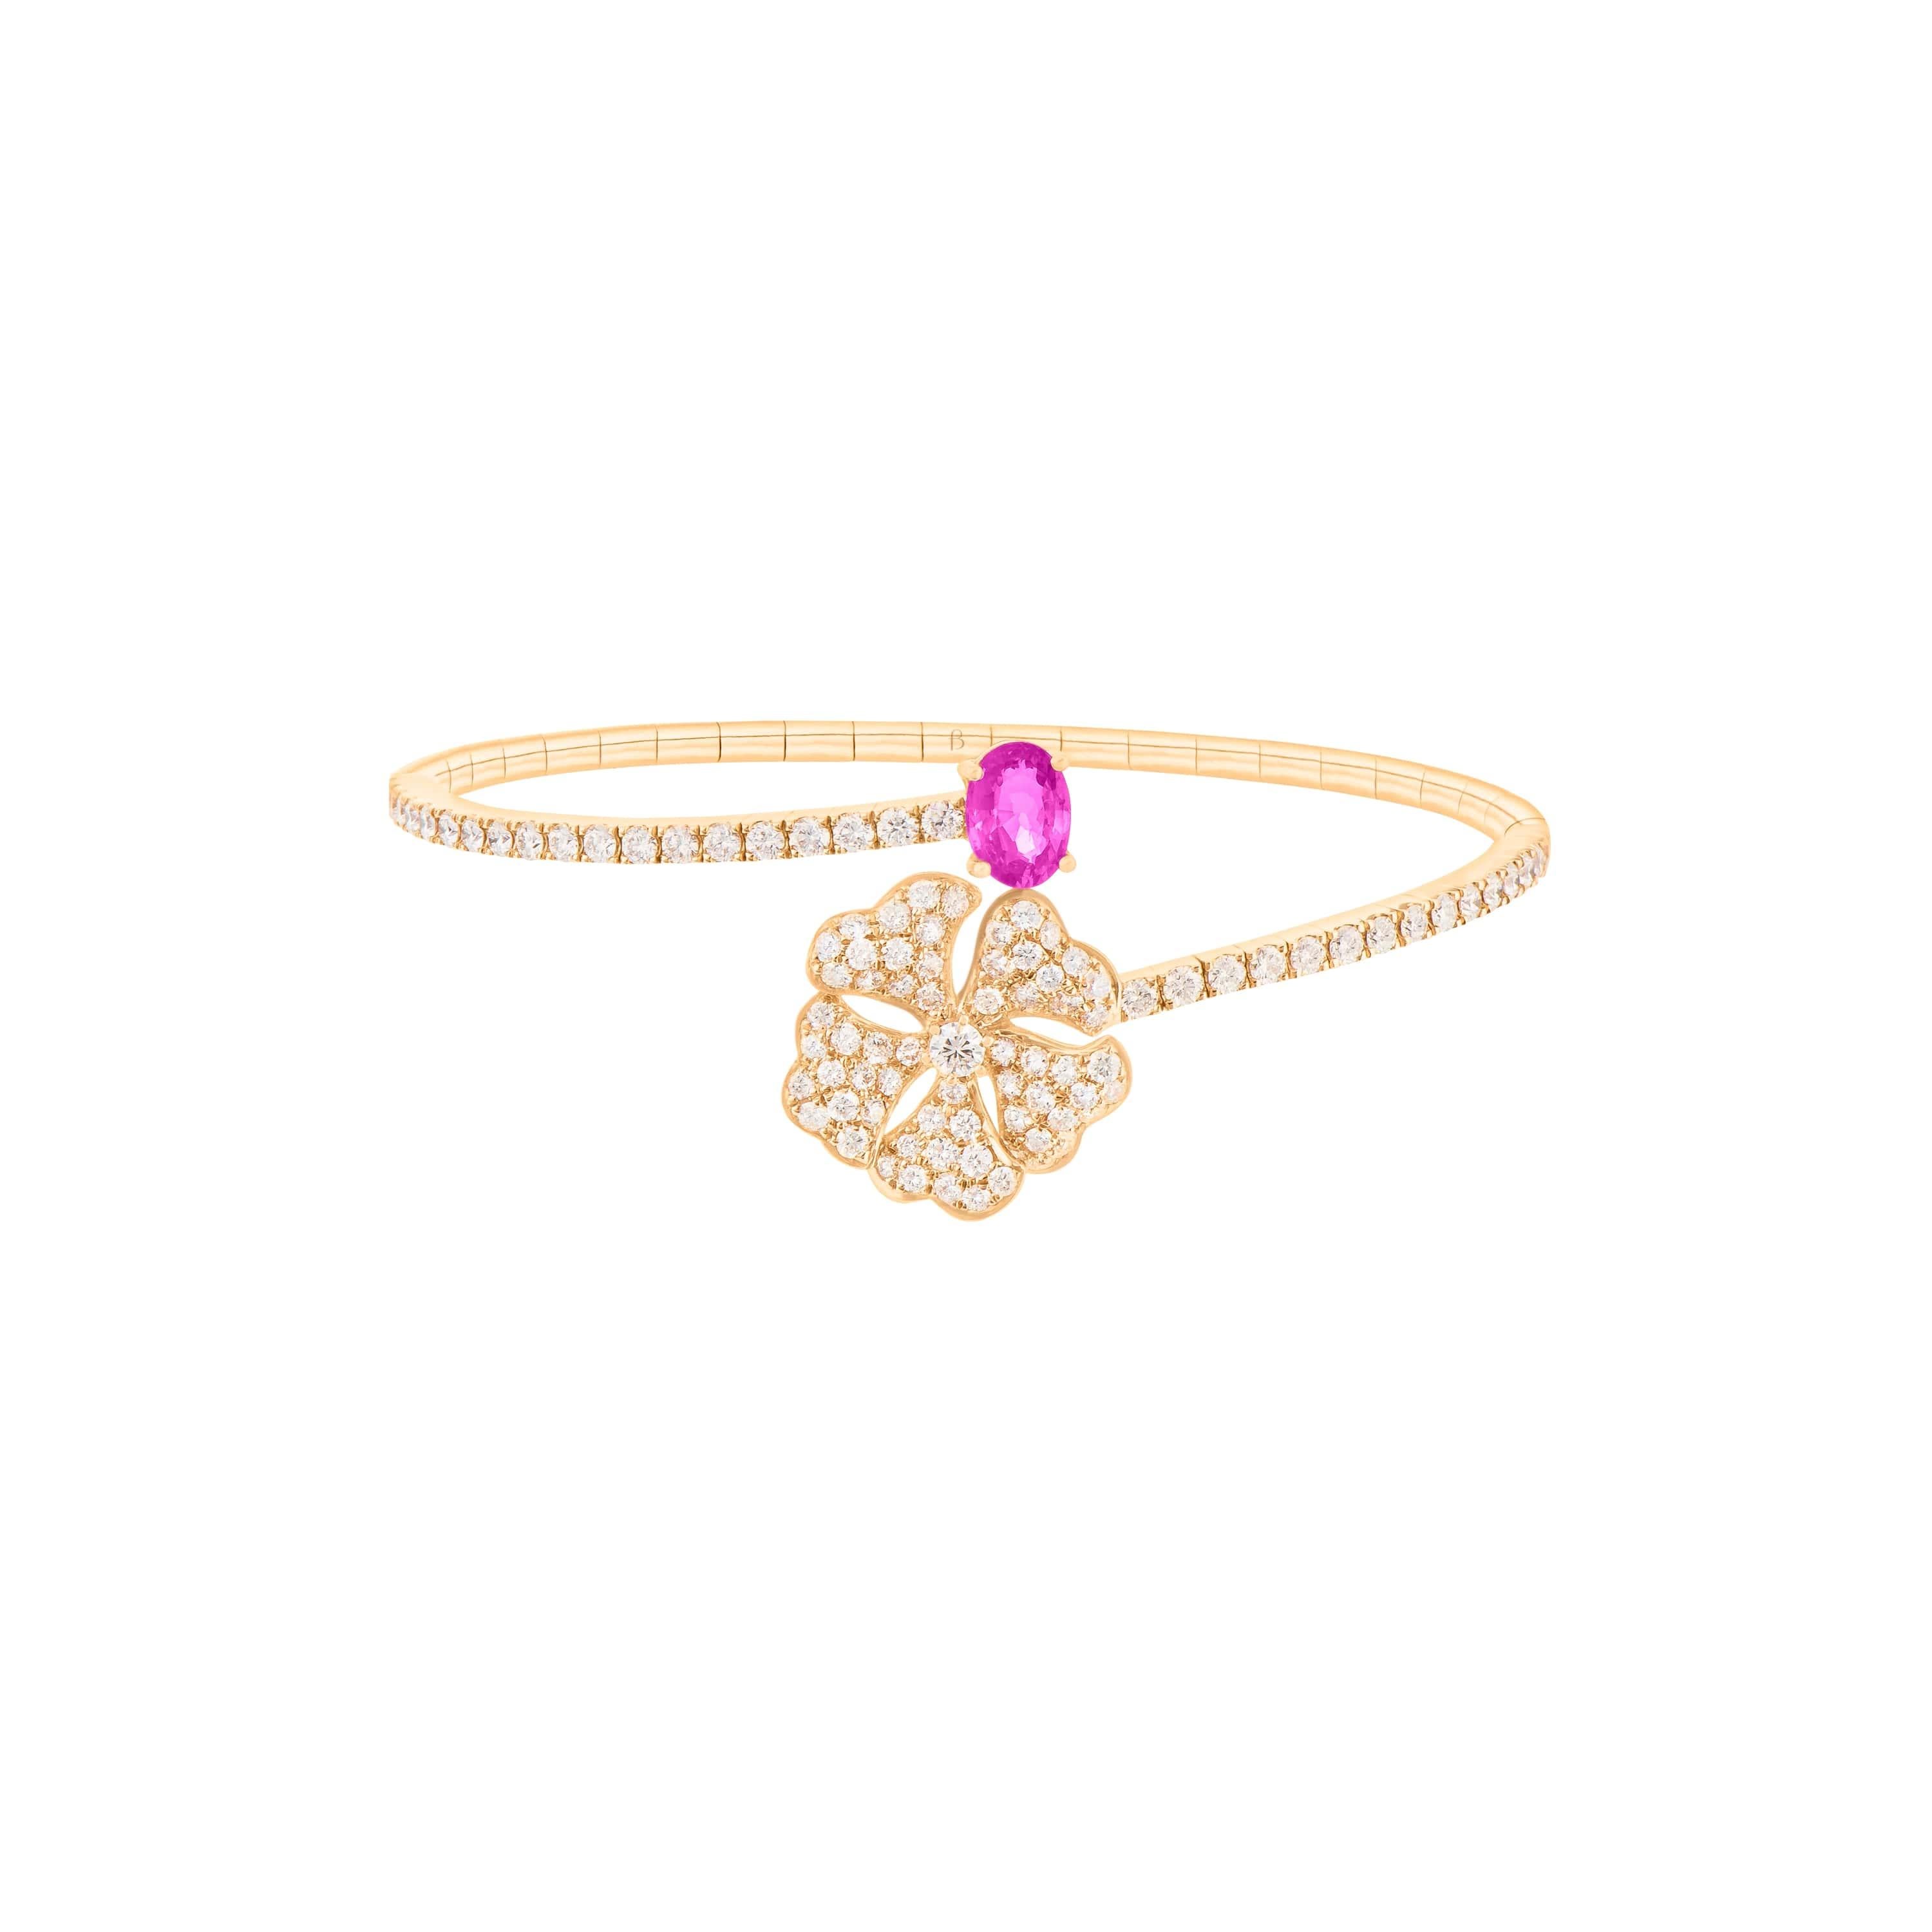 Bloom Pink Sapphire and Diamond Open Spiral Bangle in 18K Yellow Gold

Inspired by the exquisite petals of the alpine cinquefoil flower, the Bloom collection combines the richness of diamonds and precious metals with the light versatility of this